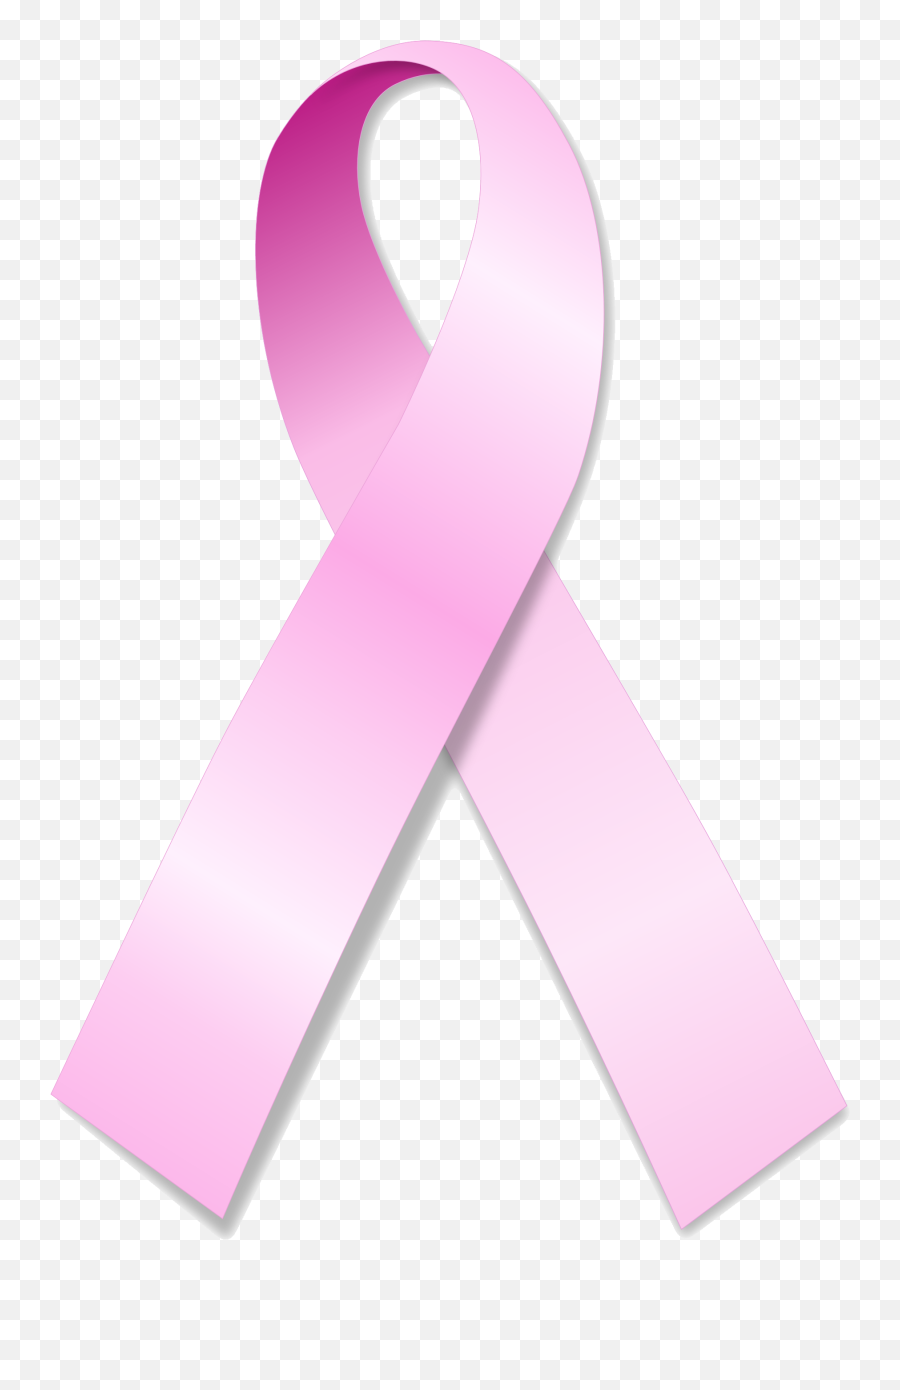 Breast Cancer Ribbon Png Transparent Images All - Transparency,Awareness Ribbon Png